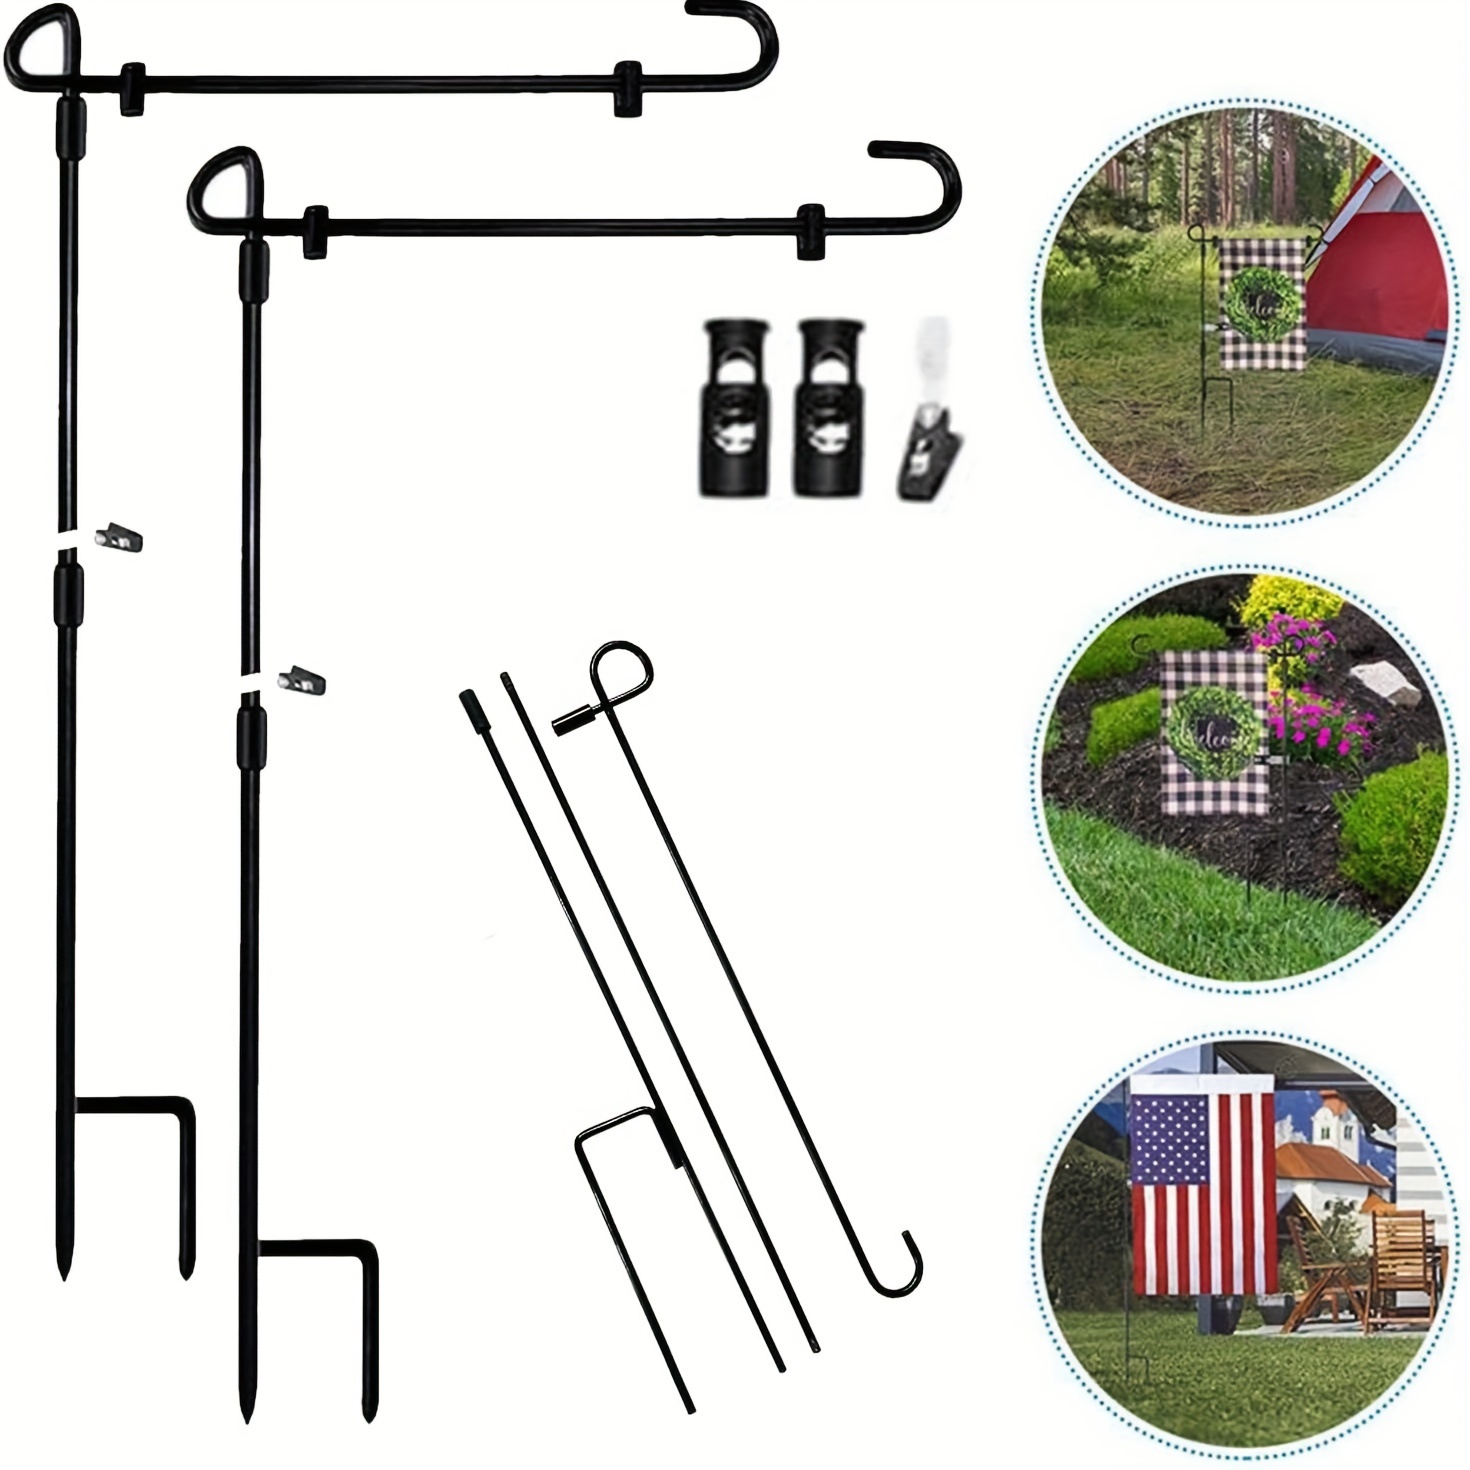 

2 Sets Of Garden Flagpole Holders, Garden Flagpole Brackets, With 2 Tiger Clips And 4 Spring Stoppers, For Garden And Home Decoration, 12 X 18 Inches, Flag Not Included